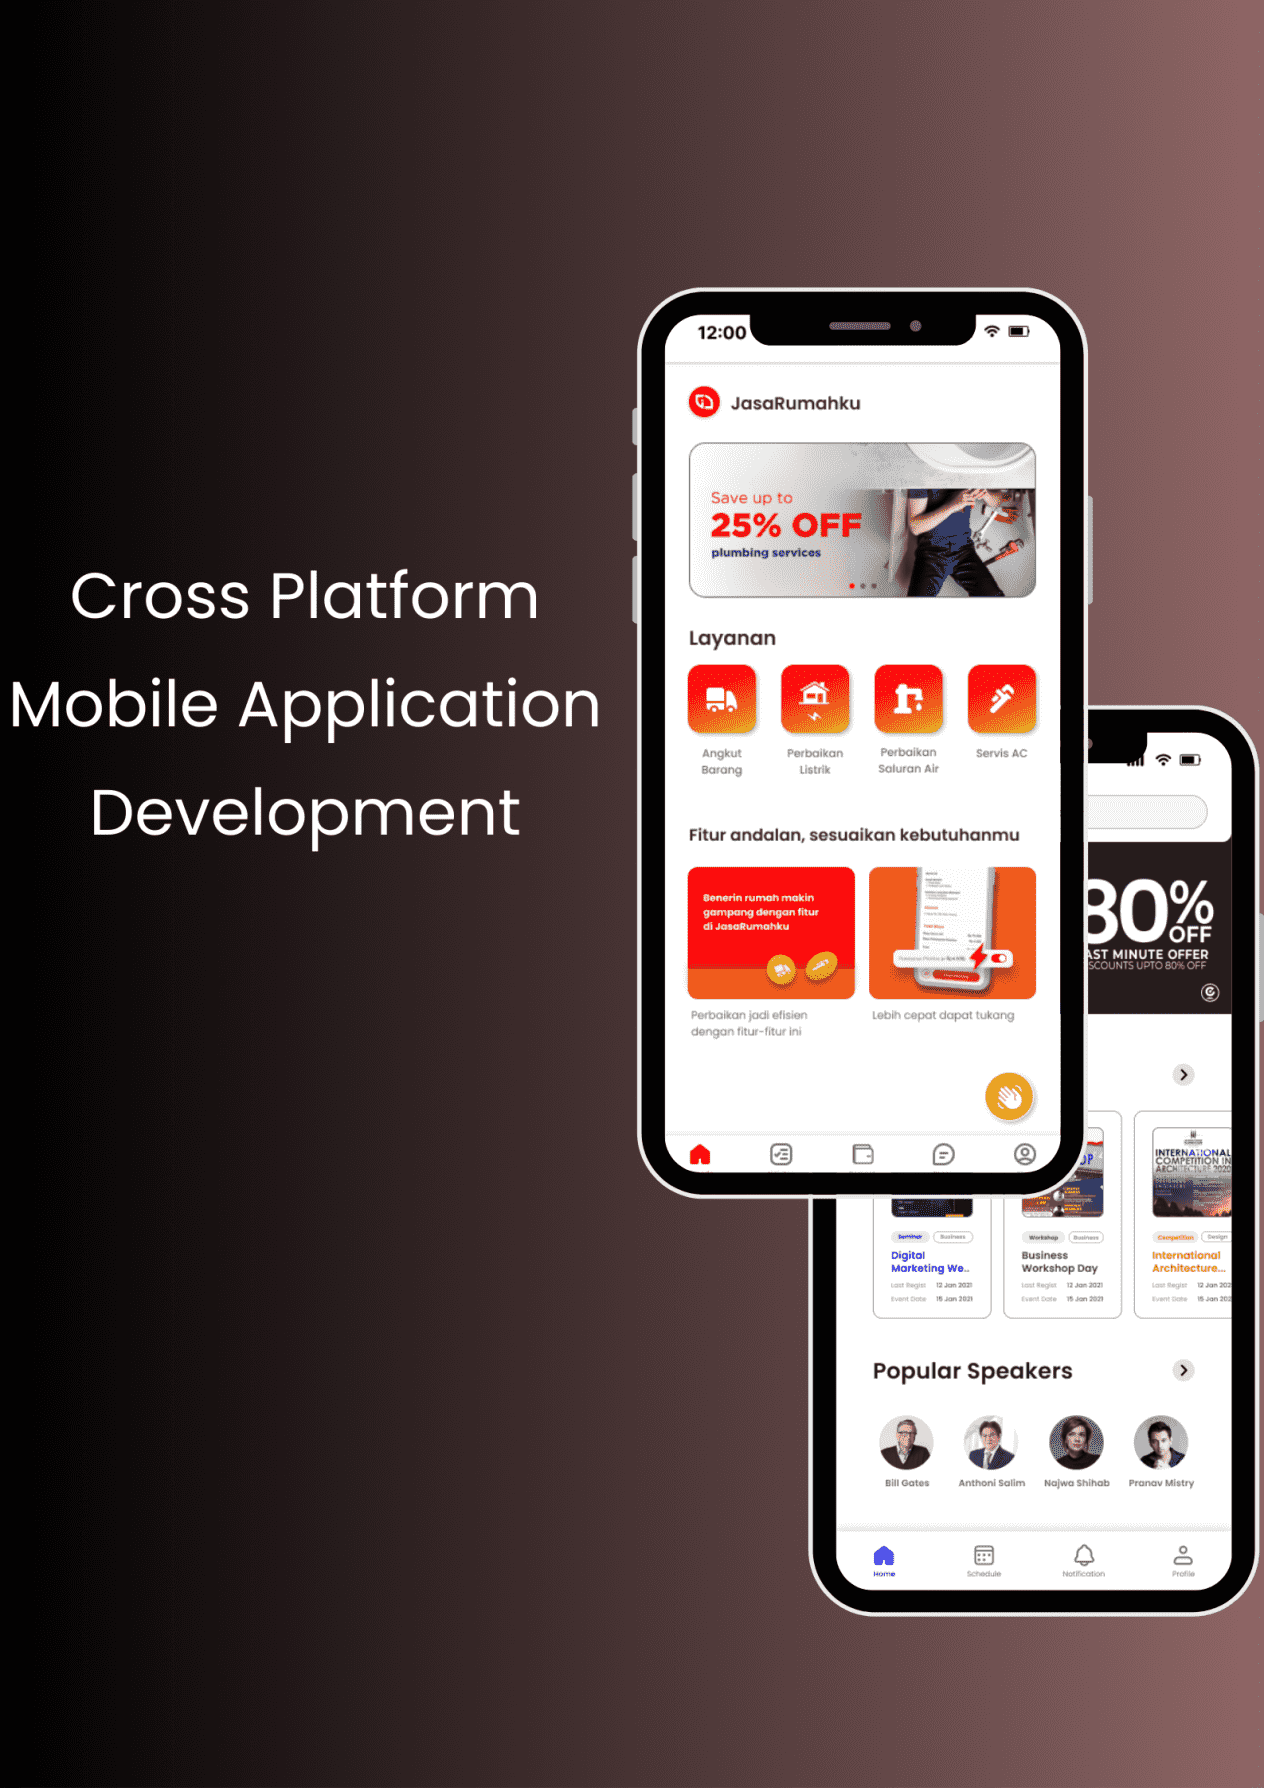 I will do cross platform mobile app development based on your ideas and concept